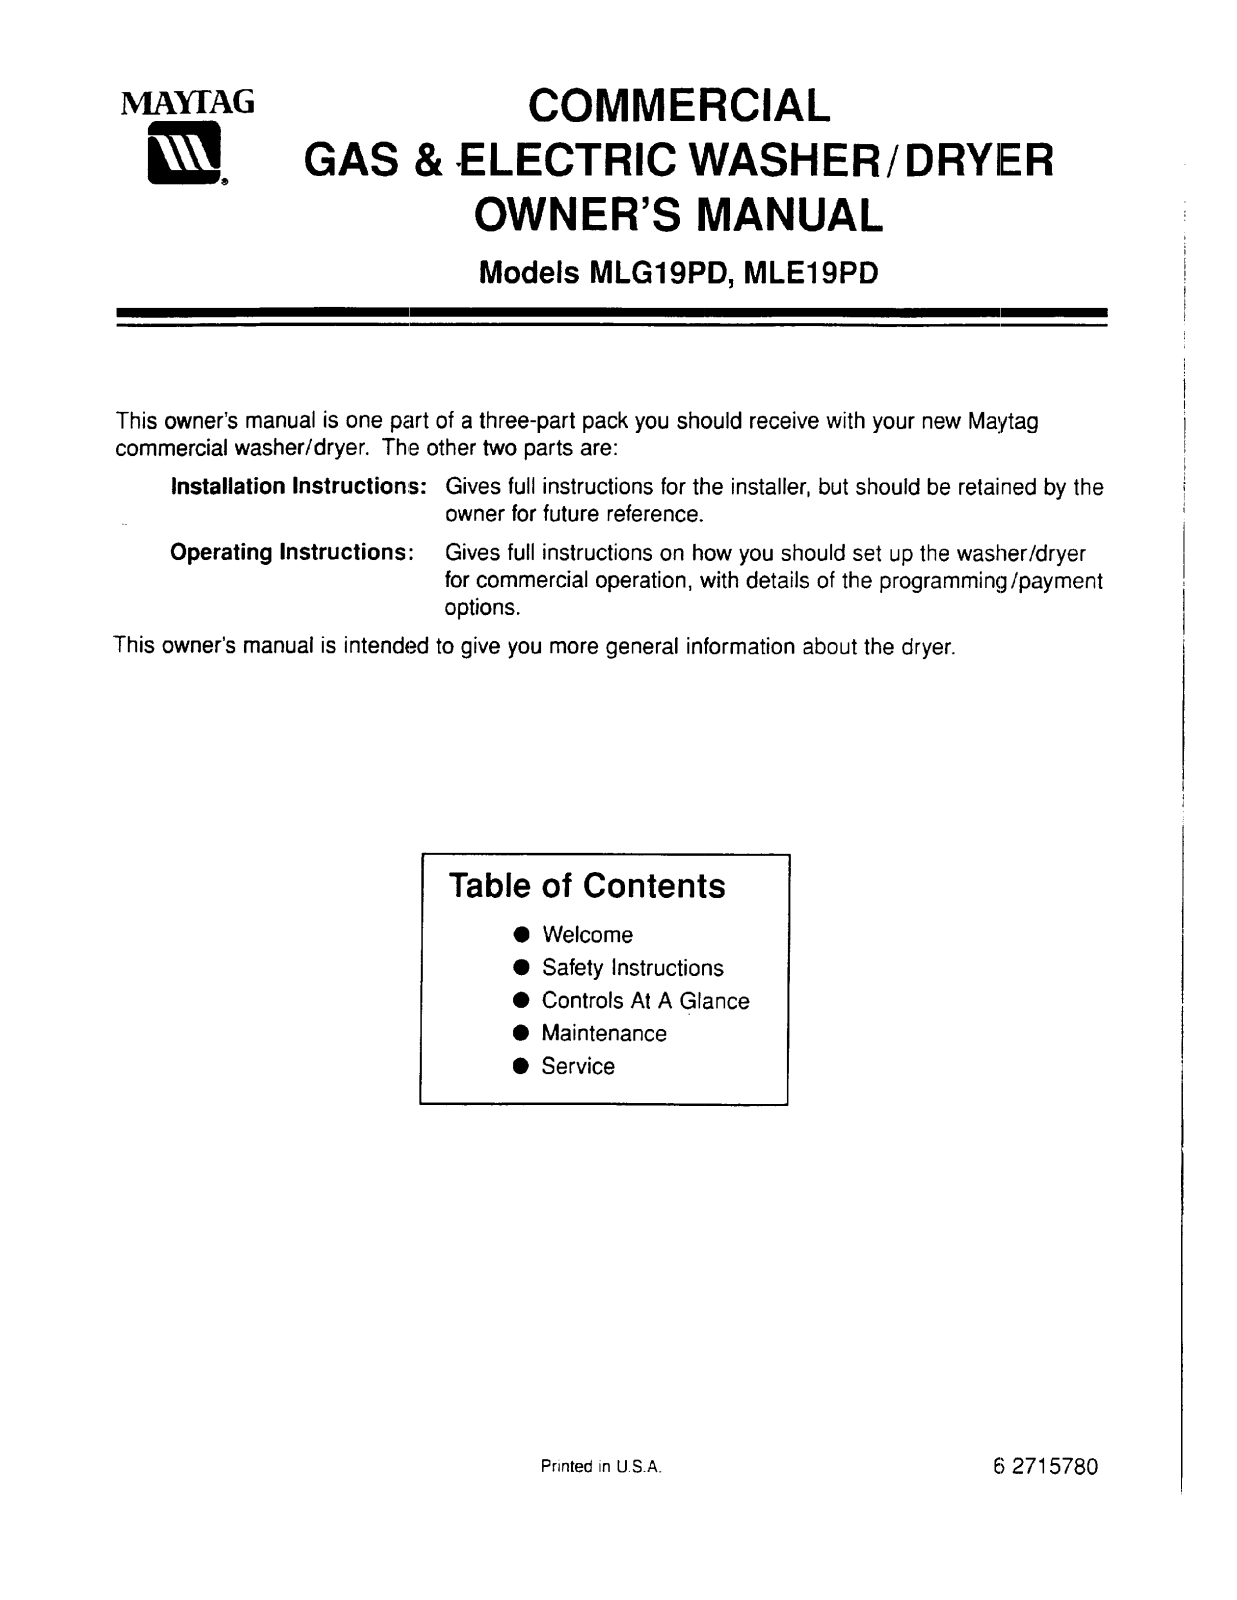 Whirlpool MLG19PD, MLE19PD Owner's Manual